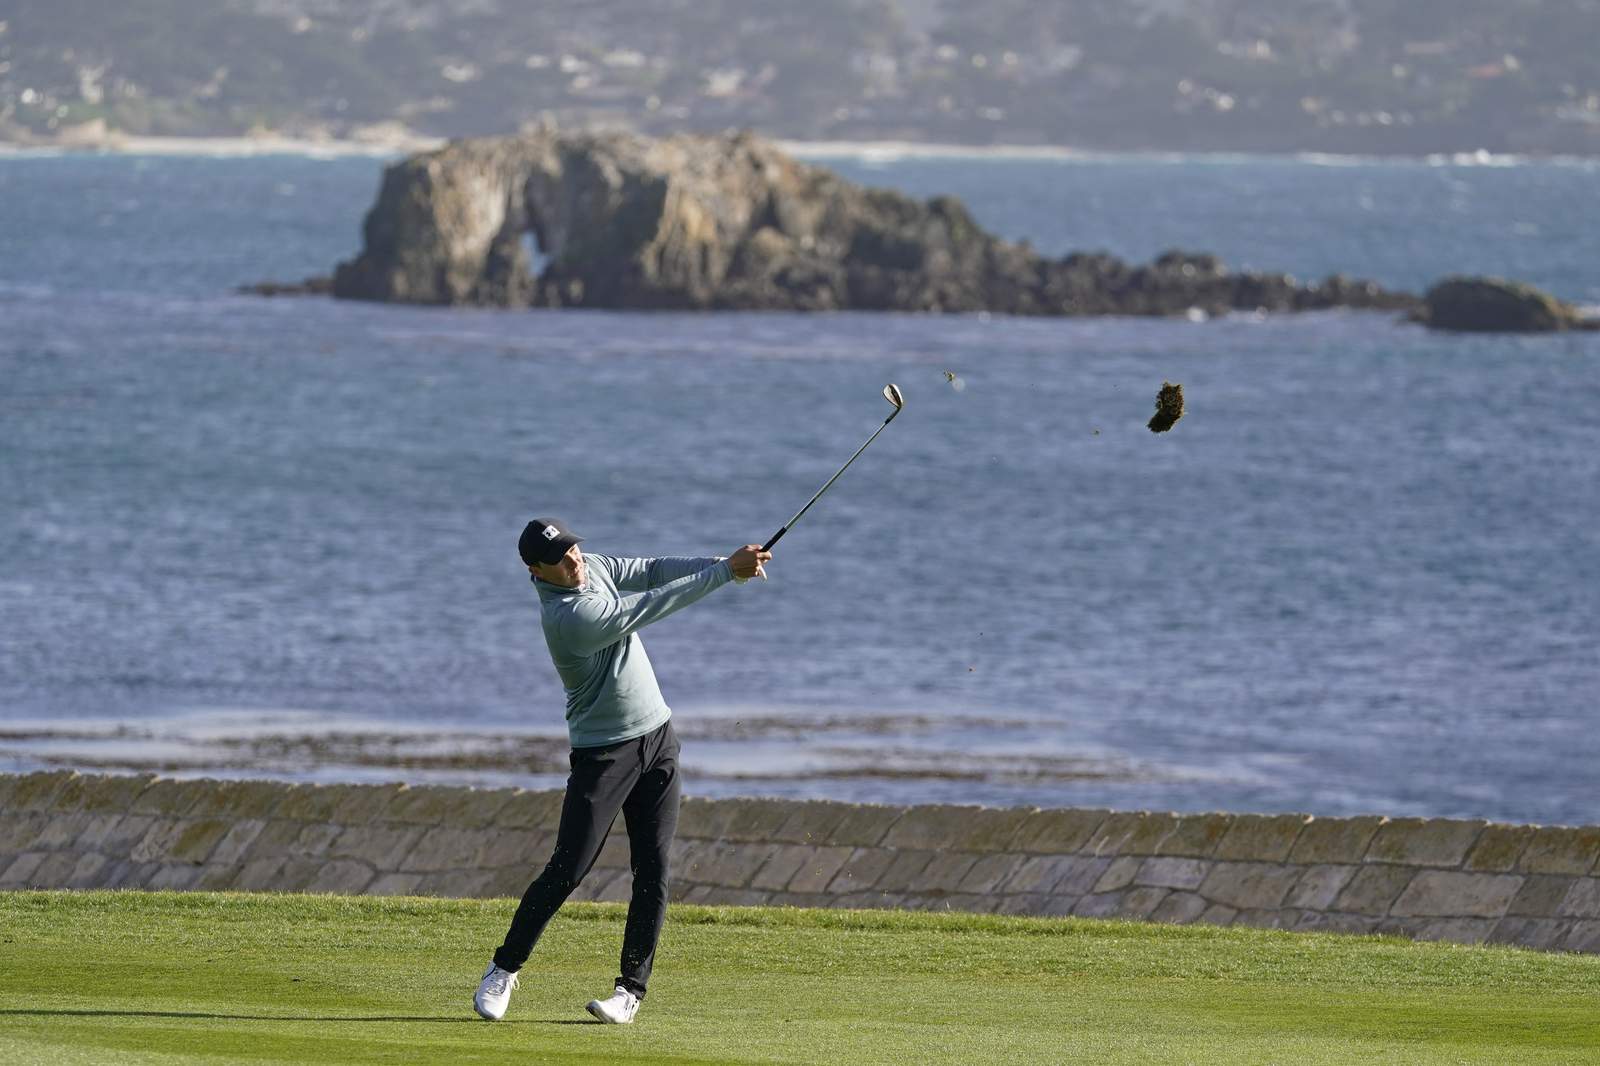 Late eagle from the fairway stakes Spieth to lead at Pebble